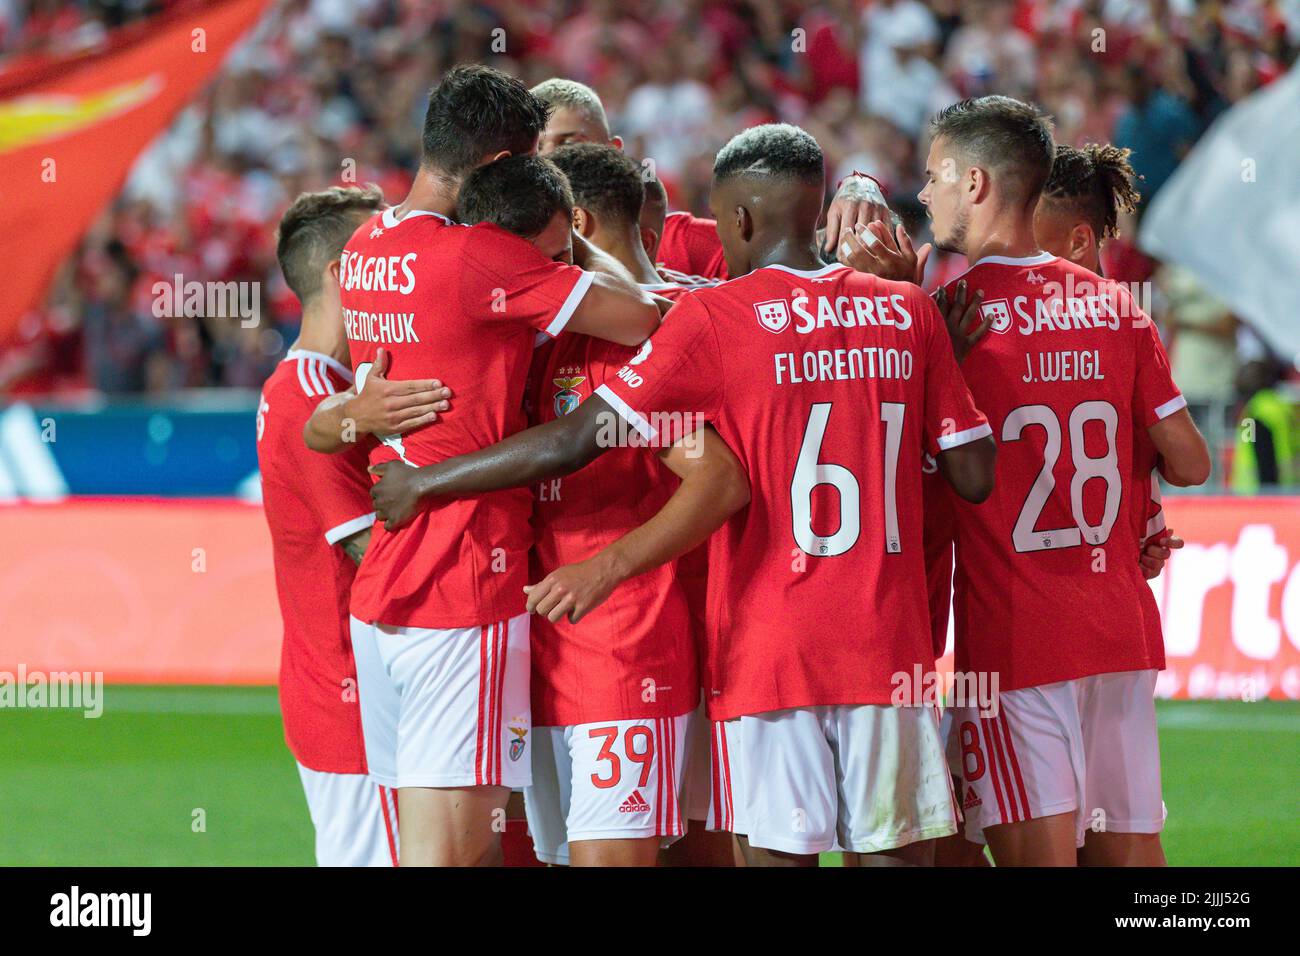 Lisbon, Portugal. July 26, 2022.  Benfica's forward from Portugal Henrique Araujo (39) celebrating with teammates after scoring a goal during the friendly game between SL Benfica vs Newcastle United FC Credit: Alexandre de Sousa/Alamy Live News Stock Photo